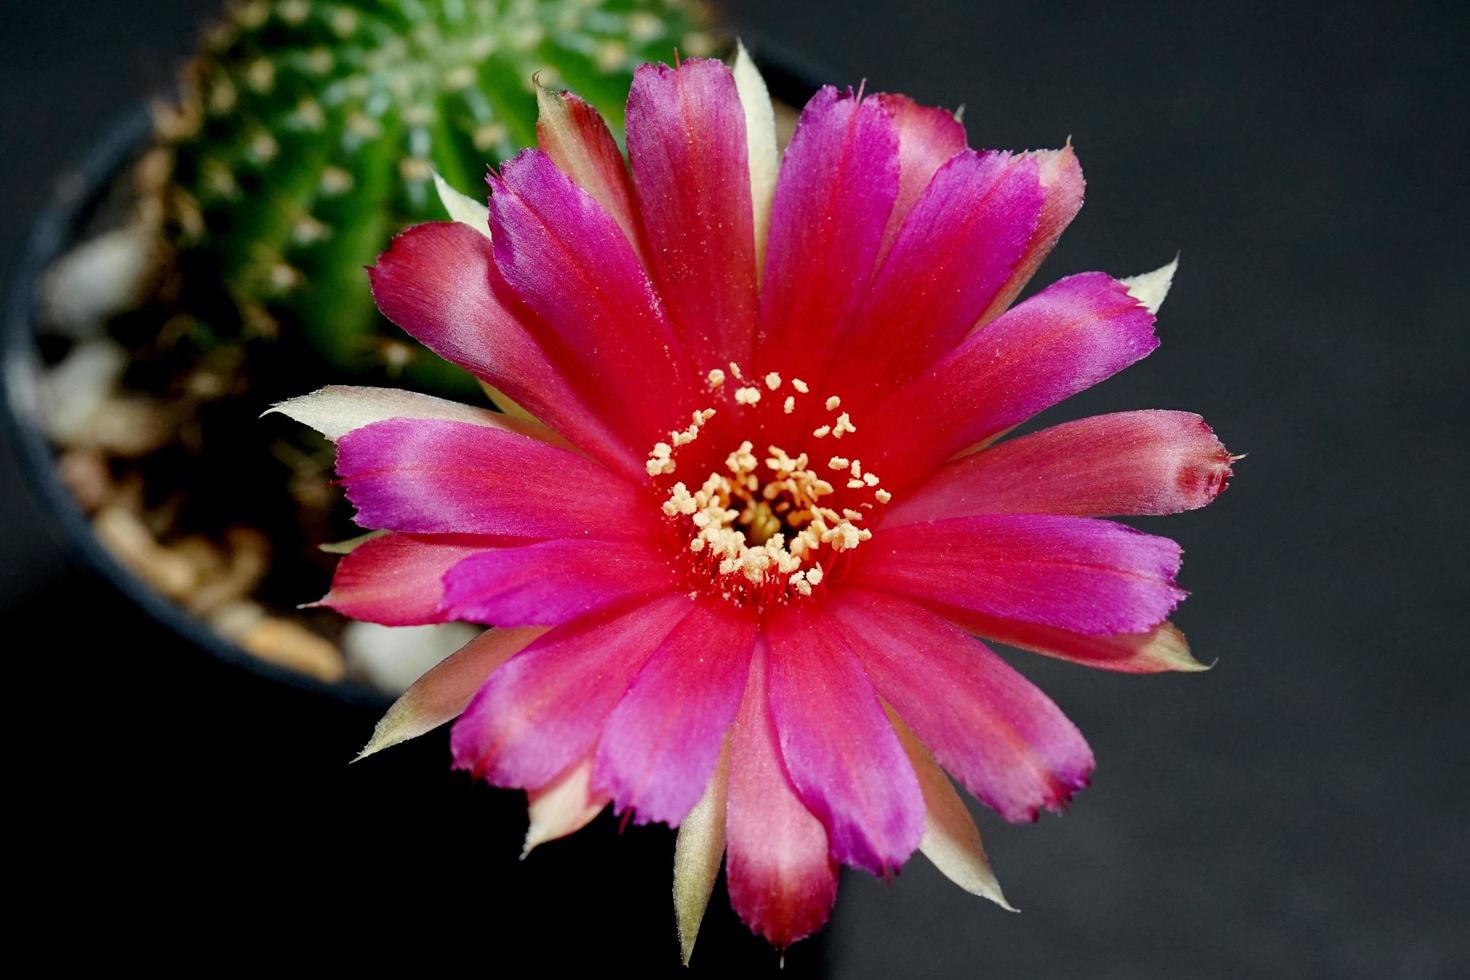 Lobivia hybrid flower pink and red, it plant type of cactus cacti stamens the yellow color is Echinopsis found in tropical ,close up shot photo